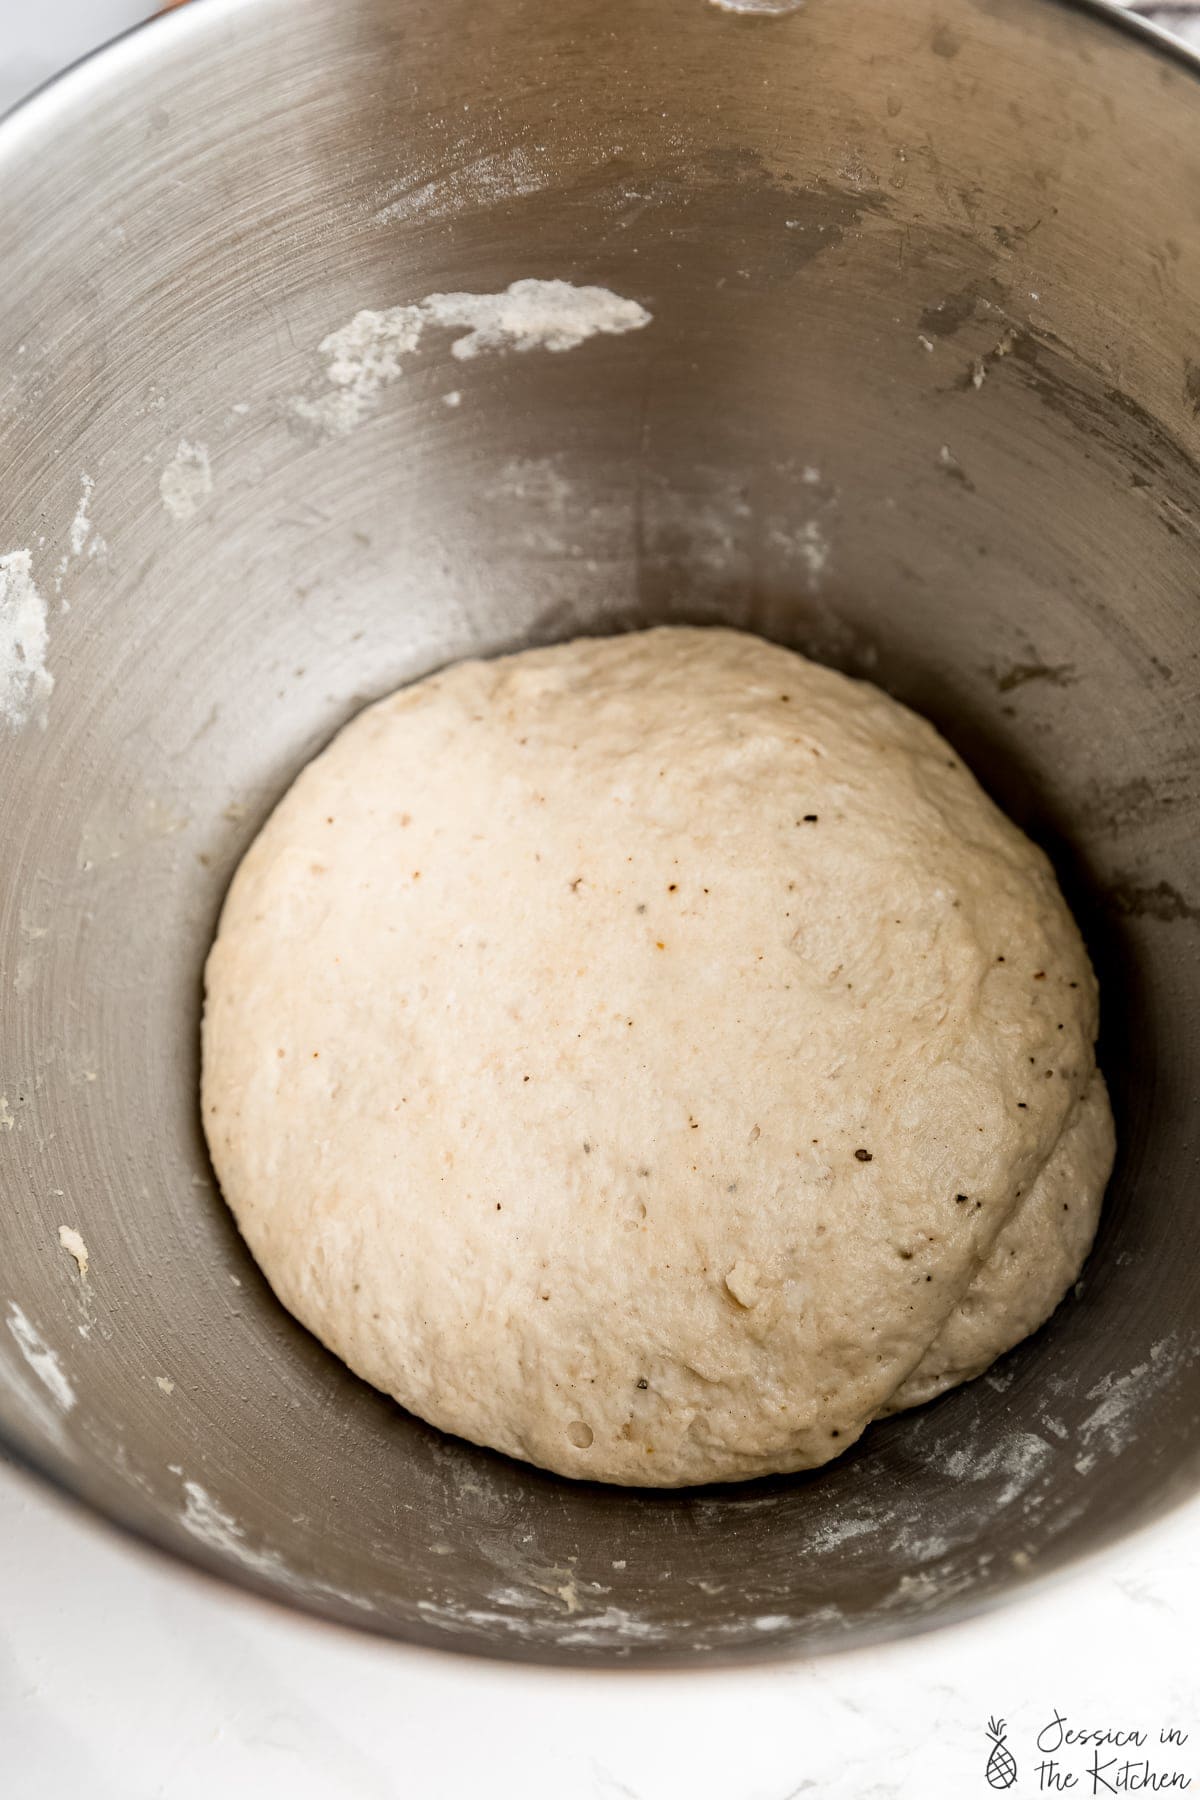 Smoothed dough in a mixing bowl.